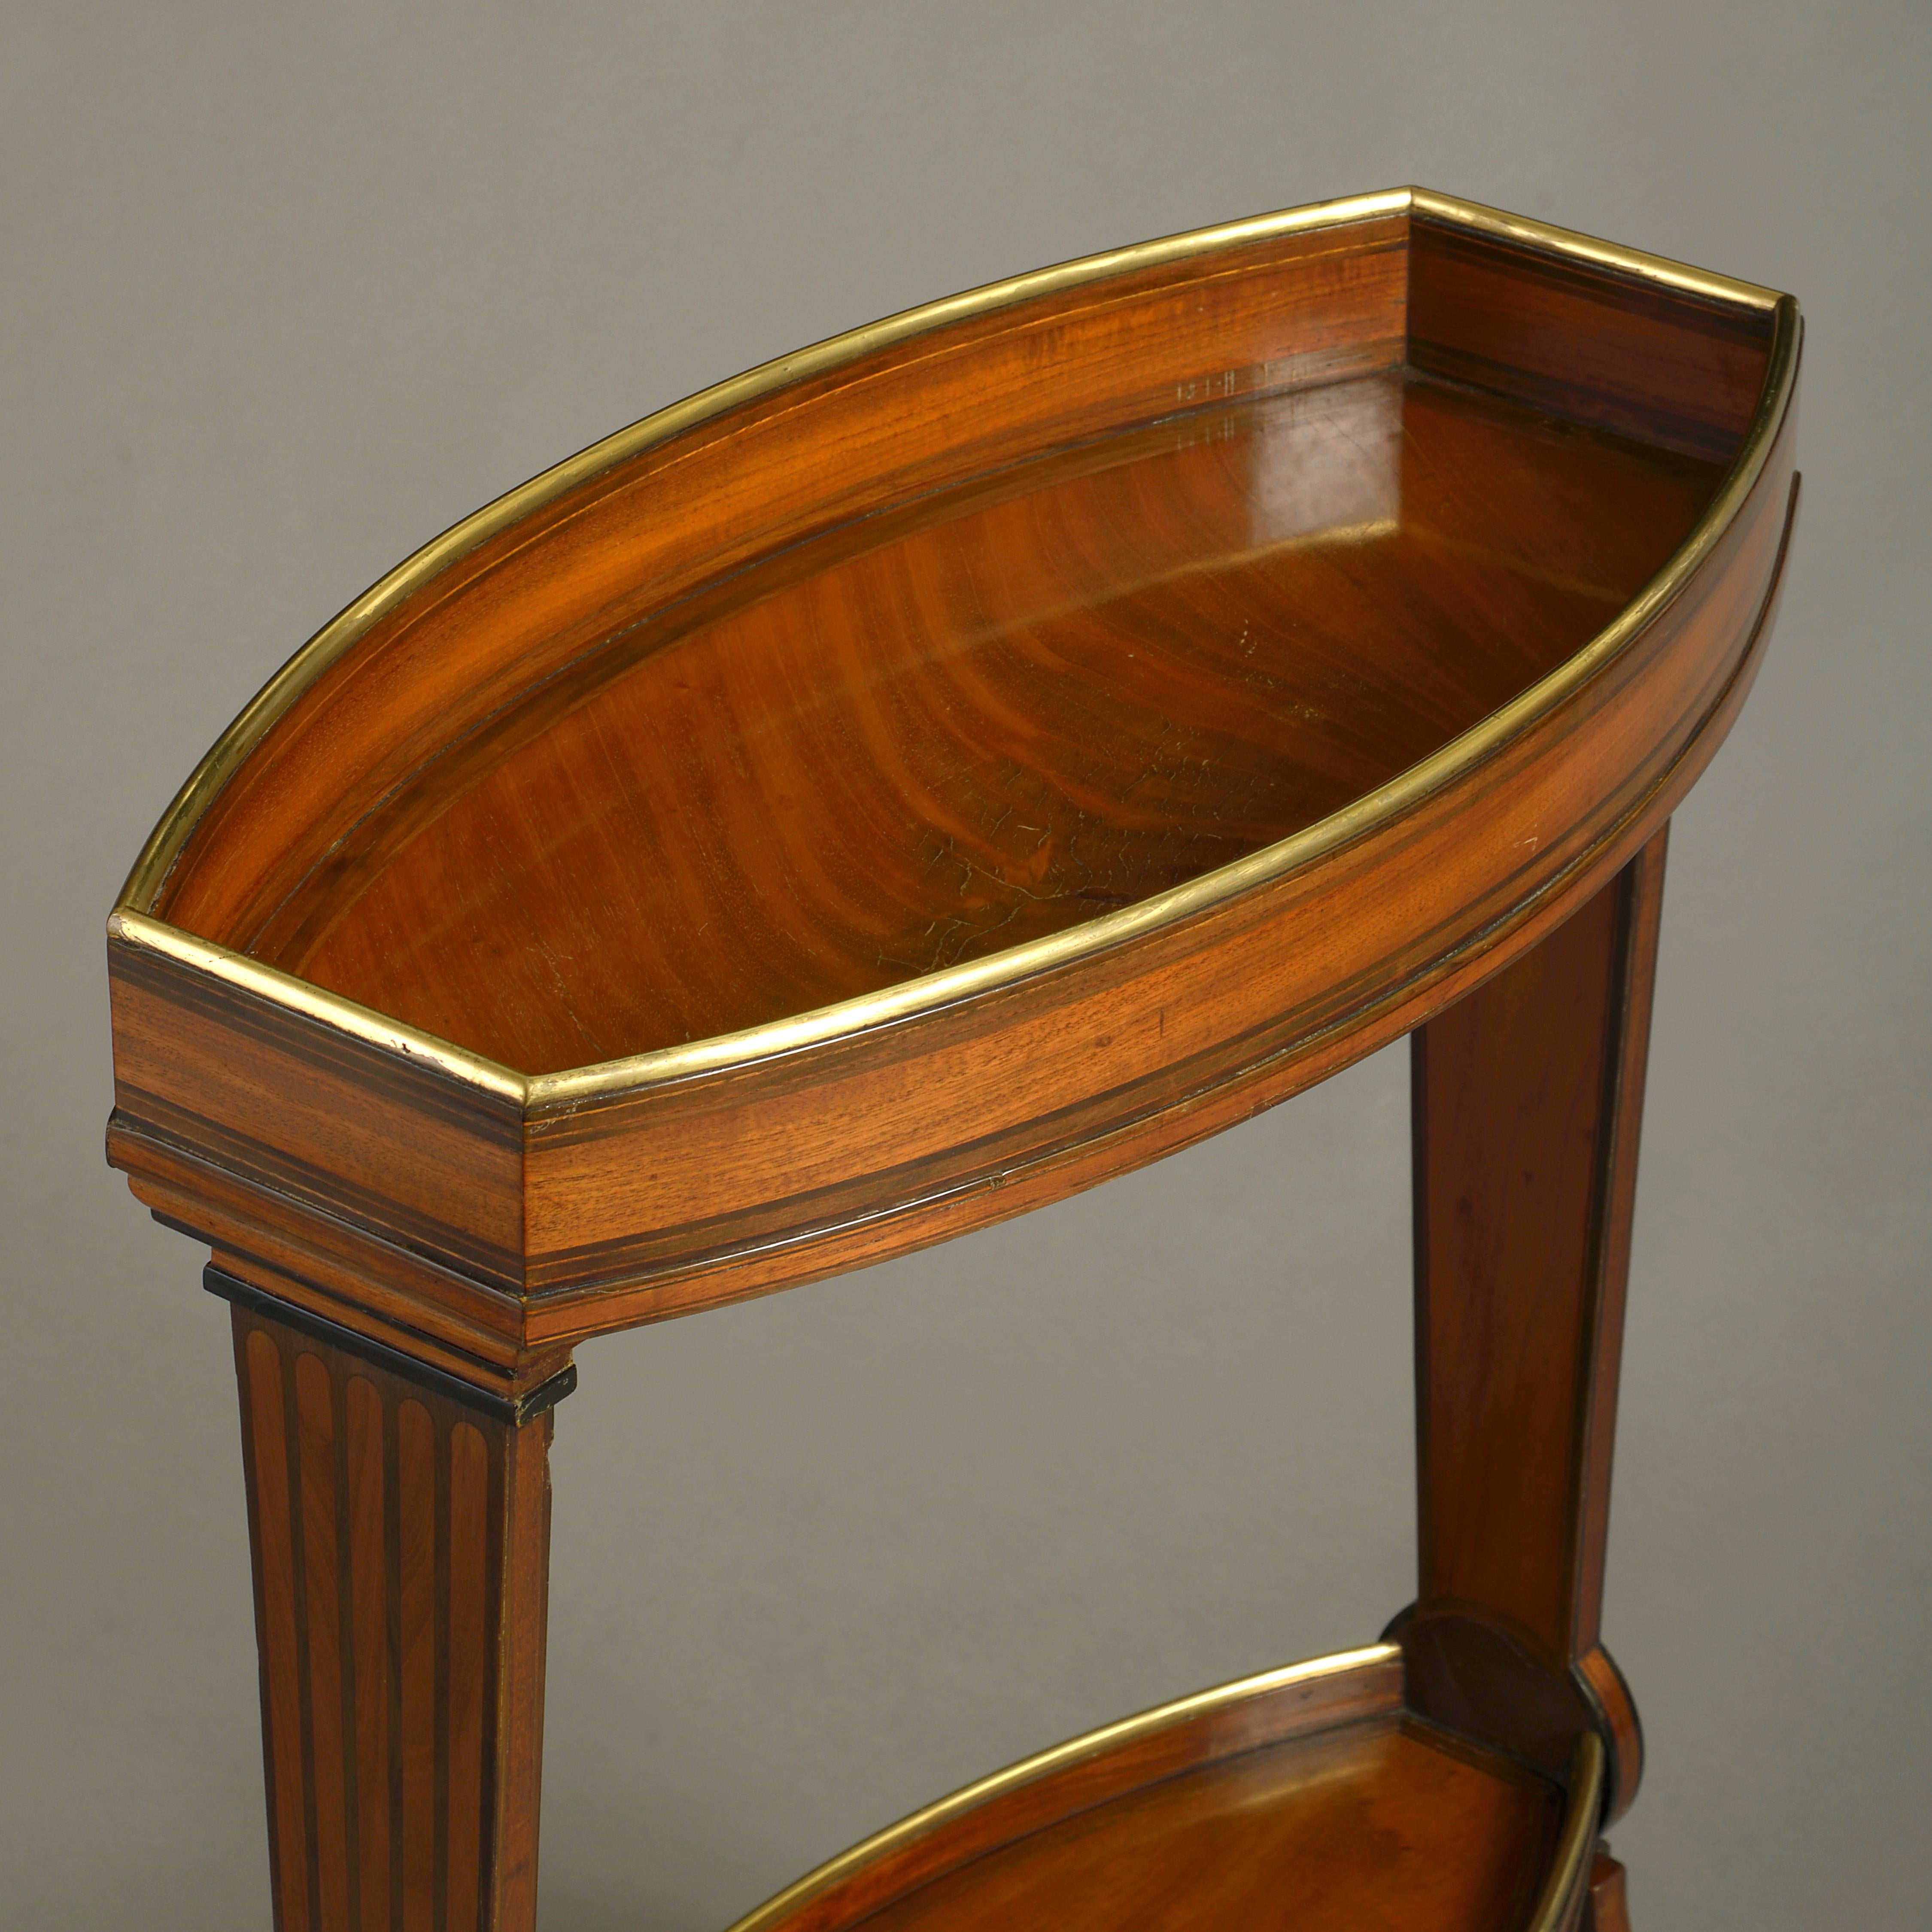 A very fine late 18th century Louis XVI Period mahogany jardinière, the concave brass mounted rectangular top having inlaid sides and set upon tapering supports with inlaid boxwood fluting, the corresponding brass mounted lower shelf upon scrolling